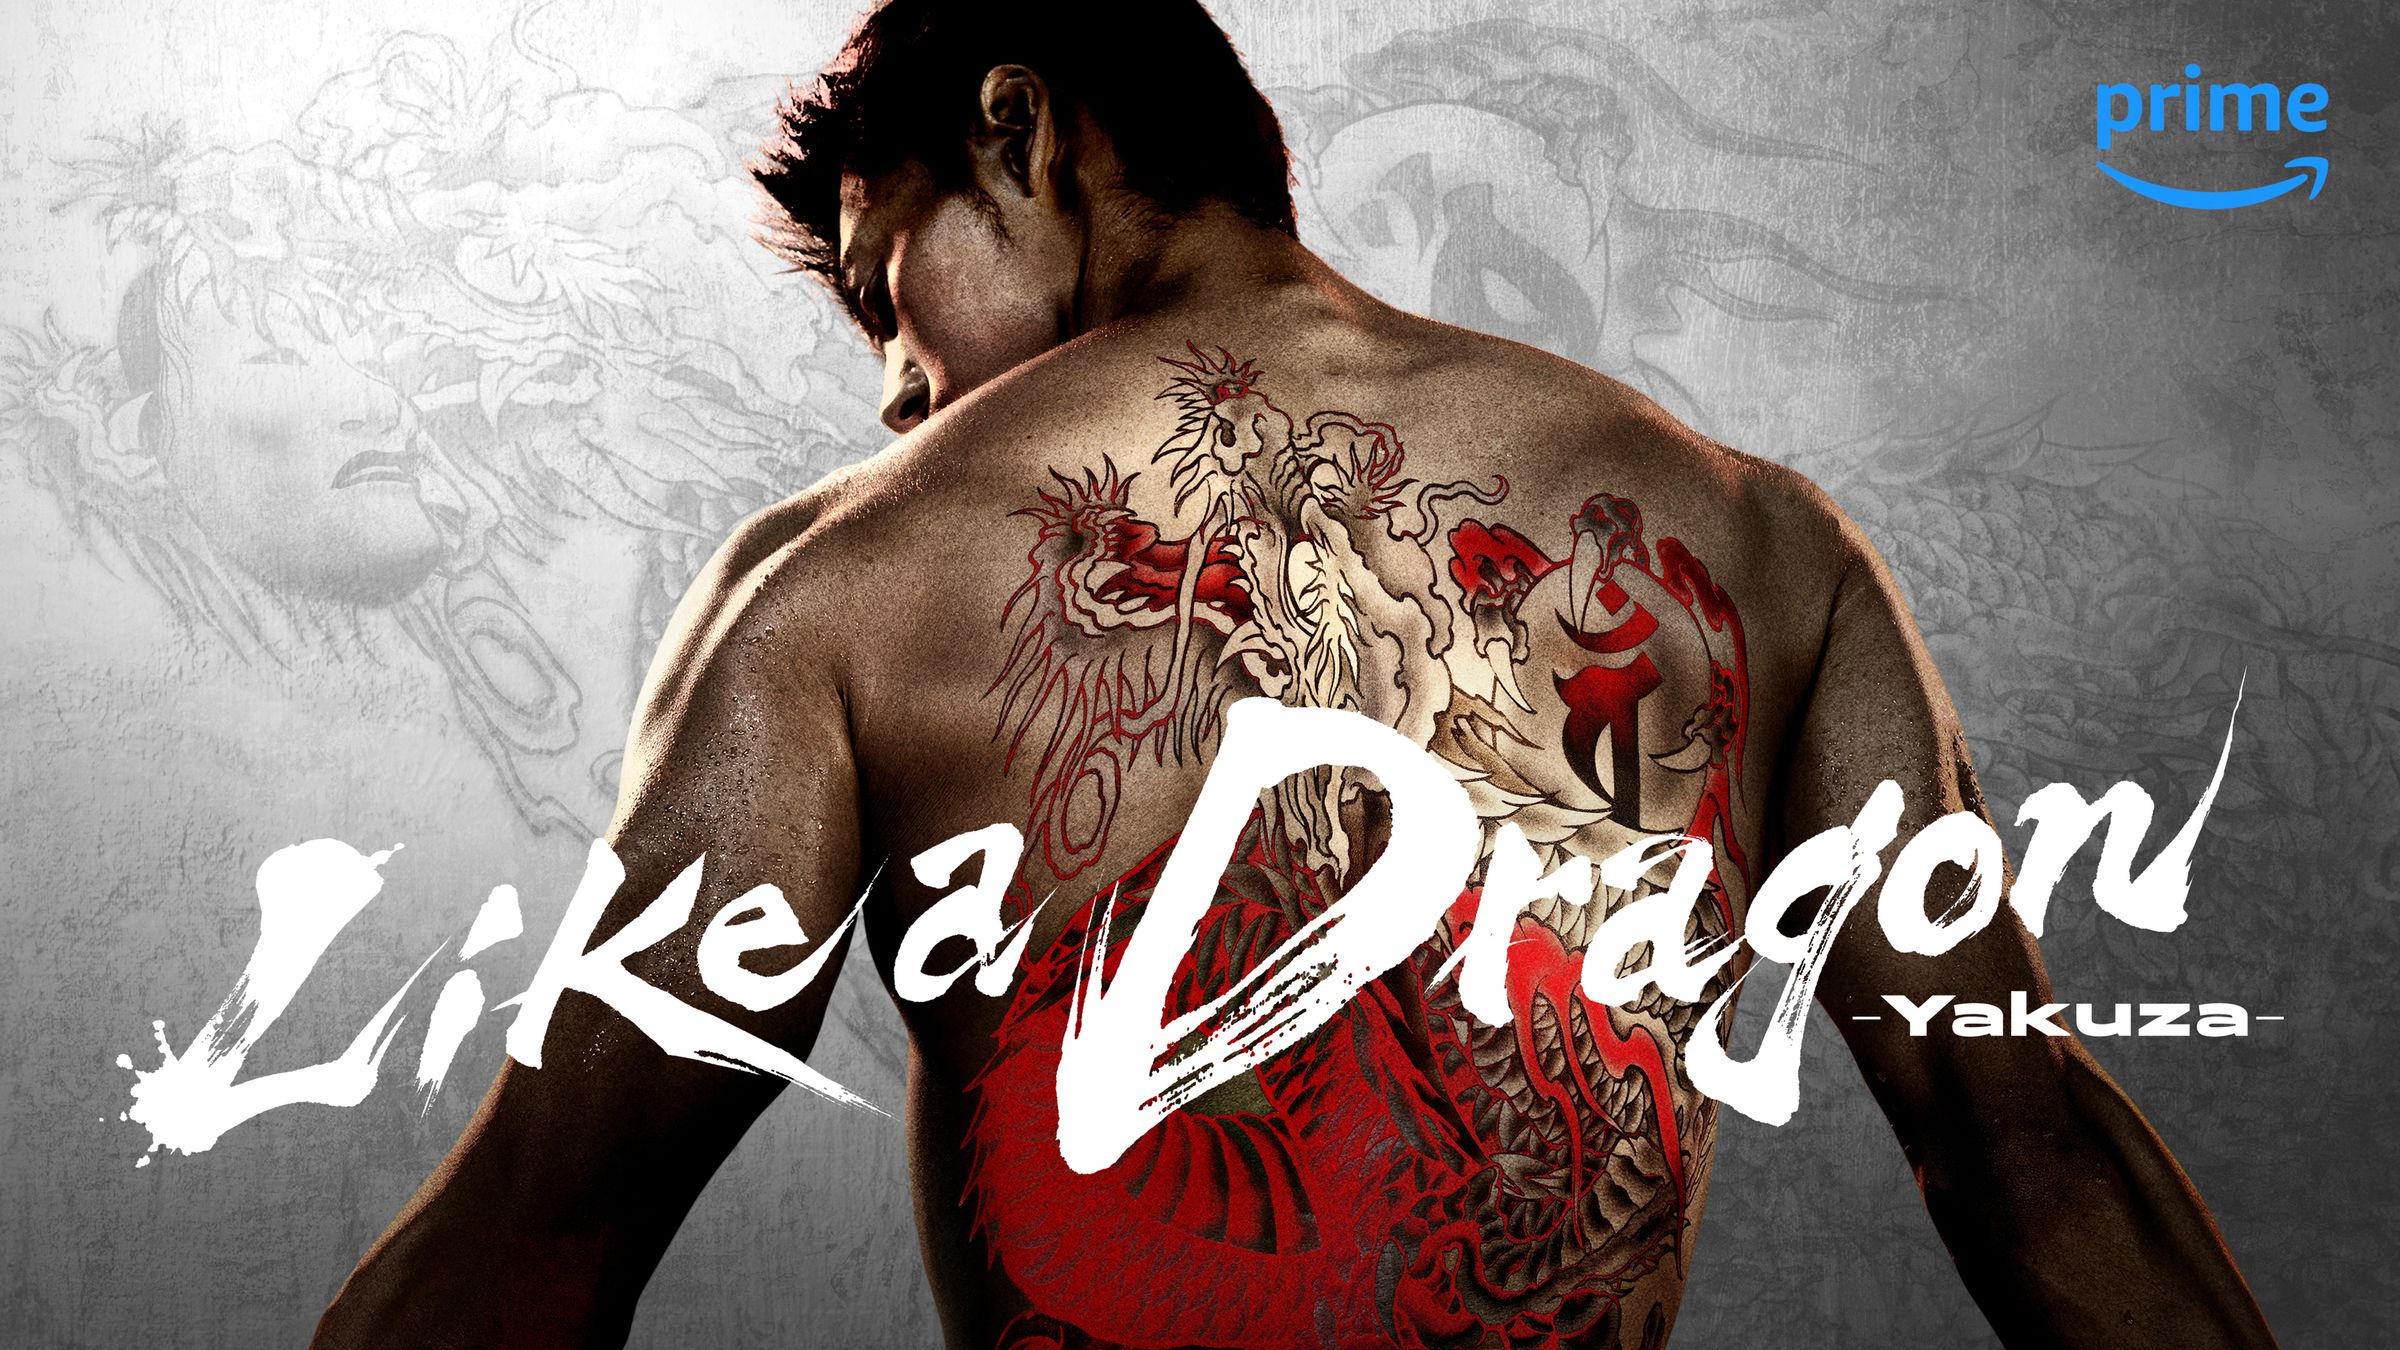 Like a dragon title image, with the name of the show and a tattooed man, and the prime video logo